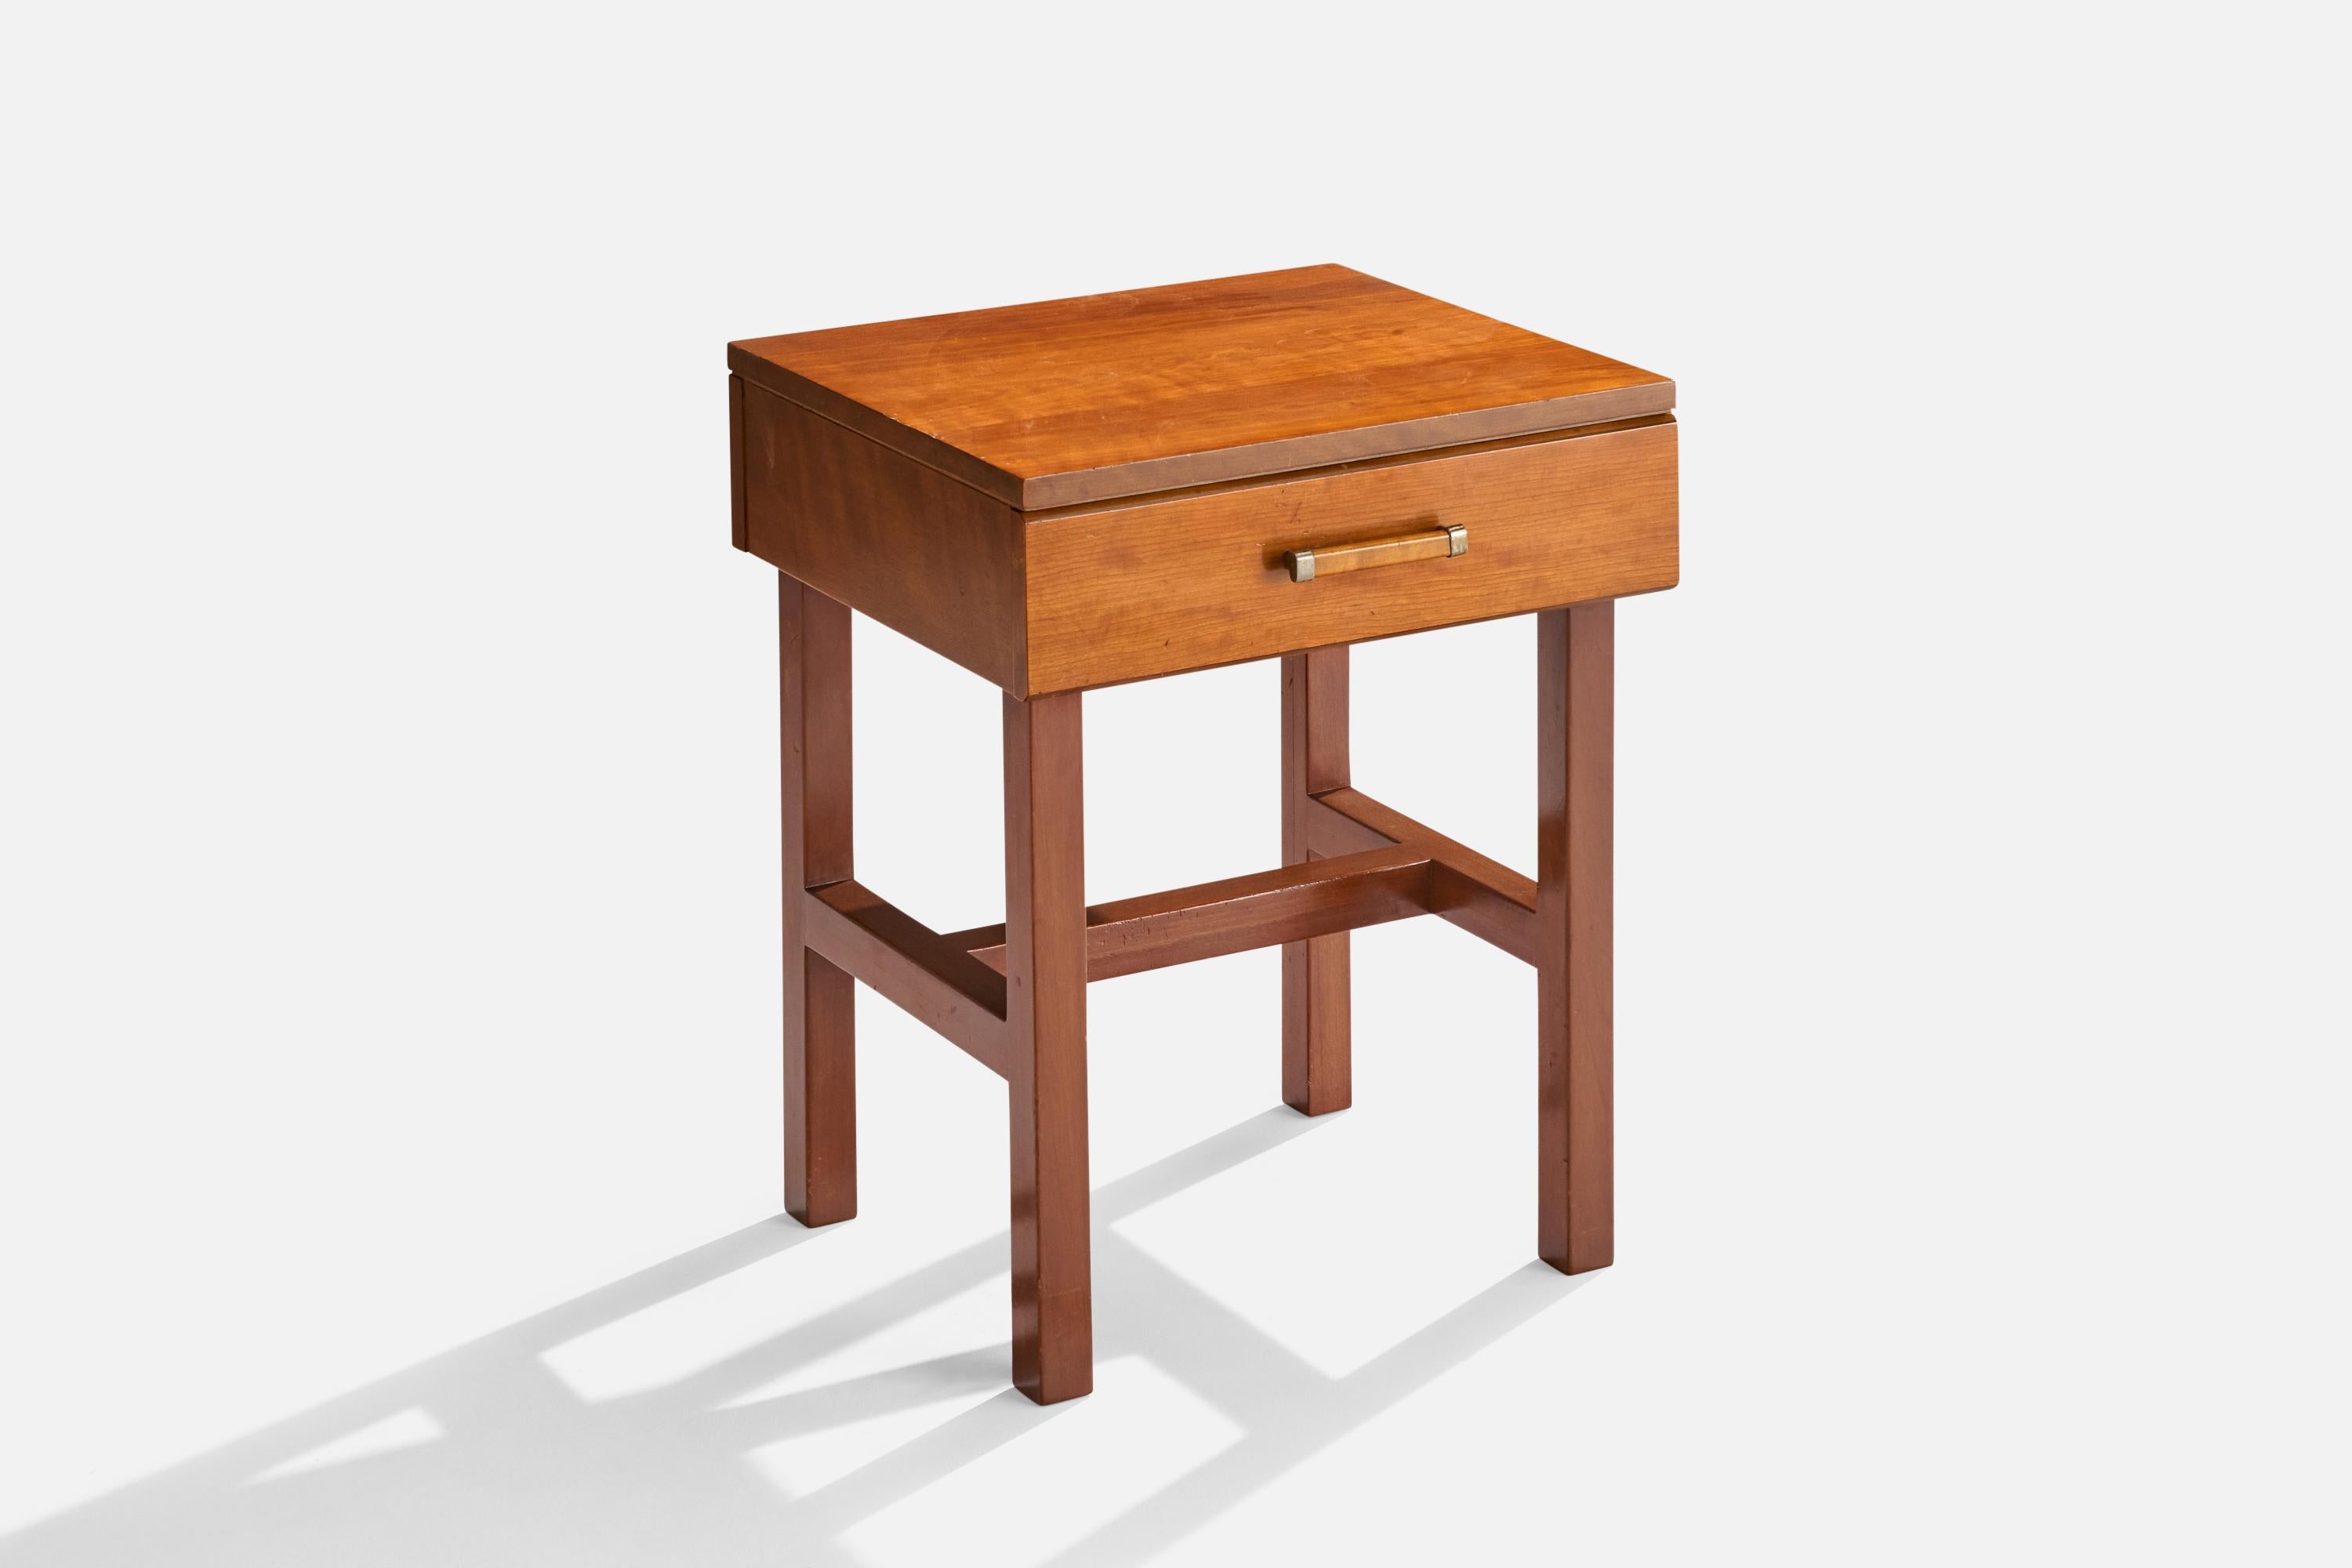 A maple and brass nightstand produced by Johnson Furniture Company, design attributed to Renzo Rutili, USA, 1940s.